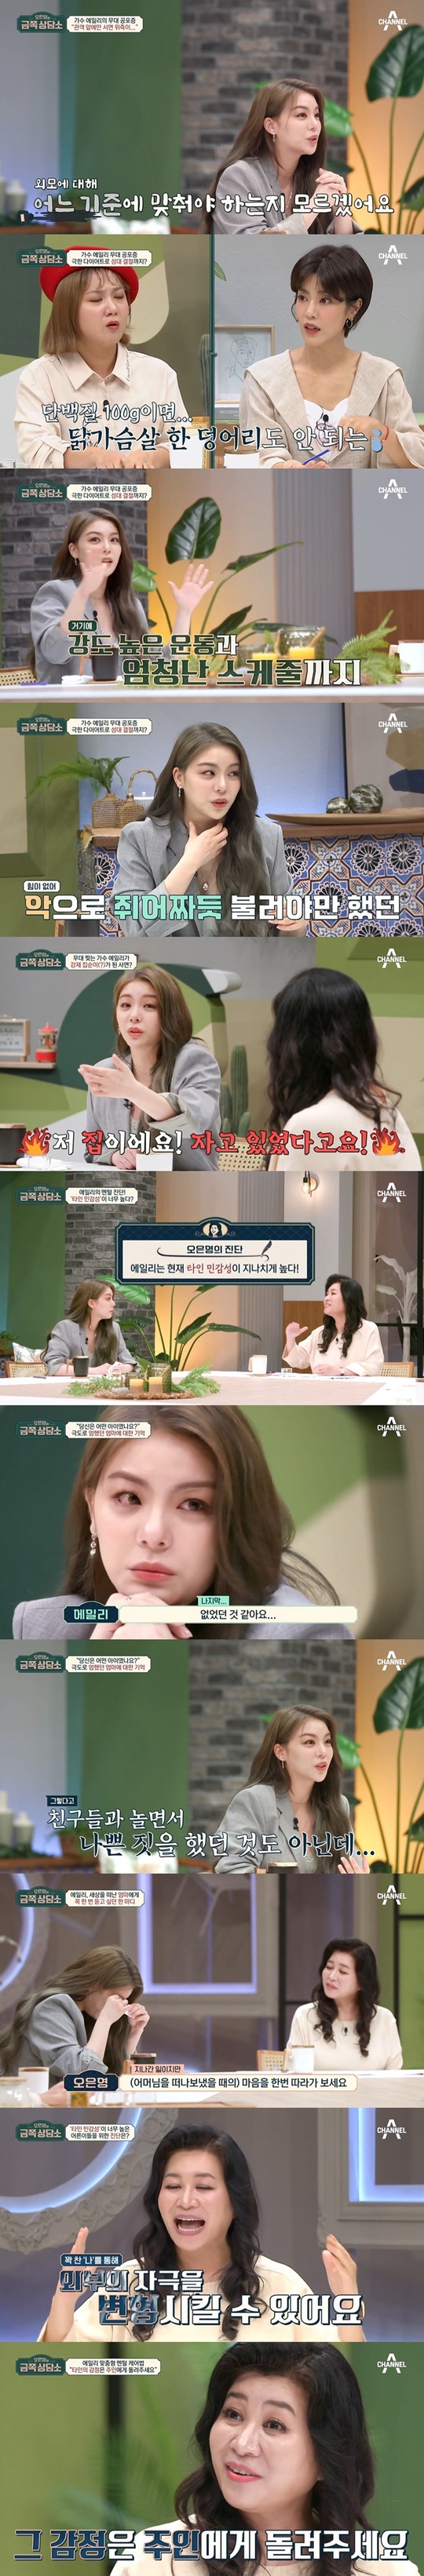 Singer Ailee has told me about her excessive diet experience because of her excessive appearance.On September 17, Channel A Oh Eun Youngs Golden Counseling Center, Ailee Confessions stage depression.Ailee has told her of her grievances about her appearance. I didnt know which criteria to meet.Ive been on the same weight for three or four years and its swollen, but when I lose my swelling, its called Ailee diet success. Ive never been on a diet.I started to see things that I did not care about, so I lost about 10-11kg in a month. I ate only two cups of 100g protein and two fruits in Haru.I ate 500 calories in Haru and exercised; it was the busiest time on stage, he said.Park Na-rae was worried, Did you have the power to sing? and Ailee said, I had no strength so I had a vocal nodule.It is said to be powerful, and it is a habit to call it that, so I have a lot of trouble in my neck. Oh Eun Young Doctorate asked if she was afraid of Ellen Burstyns Missunderstood, saying, I was so busy that I could not say hello to me. What would Oh Eun Young Doctorate do if she was Missunderstood?Ailee said, If there is another colleague in the beauty room, I say hello unconditionally because I do not say hello.Im afraid Ill be cursed for being Misunderstood, he replied.Asked if he had ever bought Missunderstock, Ailee said: Theres an opportunity to go out there, its the time when rumors are most likely at the beginning of his debut.American friends say they want to go to Sams Club in Korea. Not often (to Sams Club). Once a year? But there was someone who encountered each time.Did you come again? Its a bamboo shoot. It was so unfair.I was sleeping at home at dawn, and the manager asked me where I was. I asked him to tell me where he was, not pretending to sleep.And then someone just said I was in touch with Sams Club.I kept thinking that I saw me at Misunderstood, a entertainment facility, so I thought I should not go out at all. Oh Eun Young Doctorate, who heard this, said, Ellen Burstyn is highly sensitive.The person who is properly high is a person who knows the atmosphere and is good at social life.However, as he became a singer, he seemed to have received a lot of attention and increased. He was depressed, nervous, and anxious. Ailee also wept, saying she had not told anyone about her heart as she grew up; when O Doctorate asked, Did you not do it to your mother? Ailee nodded.My mother was a strong person. Especially strict to me. I have not met friends since I was a child.I thought I was playing a lot of going out of my house once a month, so I played secretly until my mother left work. Ailees mother, who died earlier this year, Oh Doctorate advised, Its a passing thing, but I hope youll follow your mind then, itll be a lot of help.No matter how best I do, I can not prevent various things. There is a space in the middle of something coming and happening.If you are healthy, you should be filled with me, not empty. So when you get external stimulation, you do not go out as a result, but the transformation happens for me. The mind of the person who hates is not Ailee, but the person who does not like it. The persons heart is returned to the owner and Ailee does not sit down.